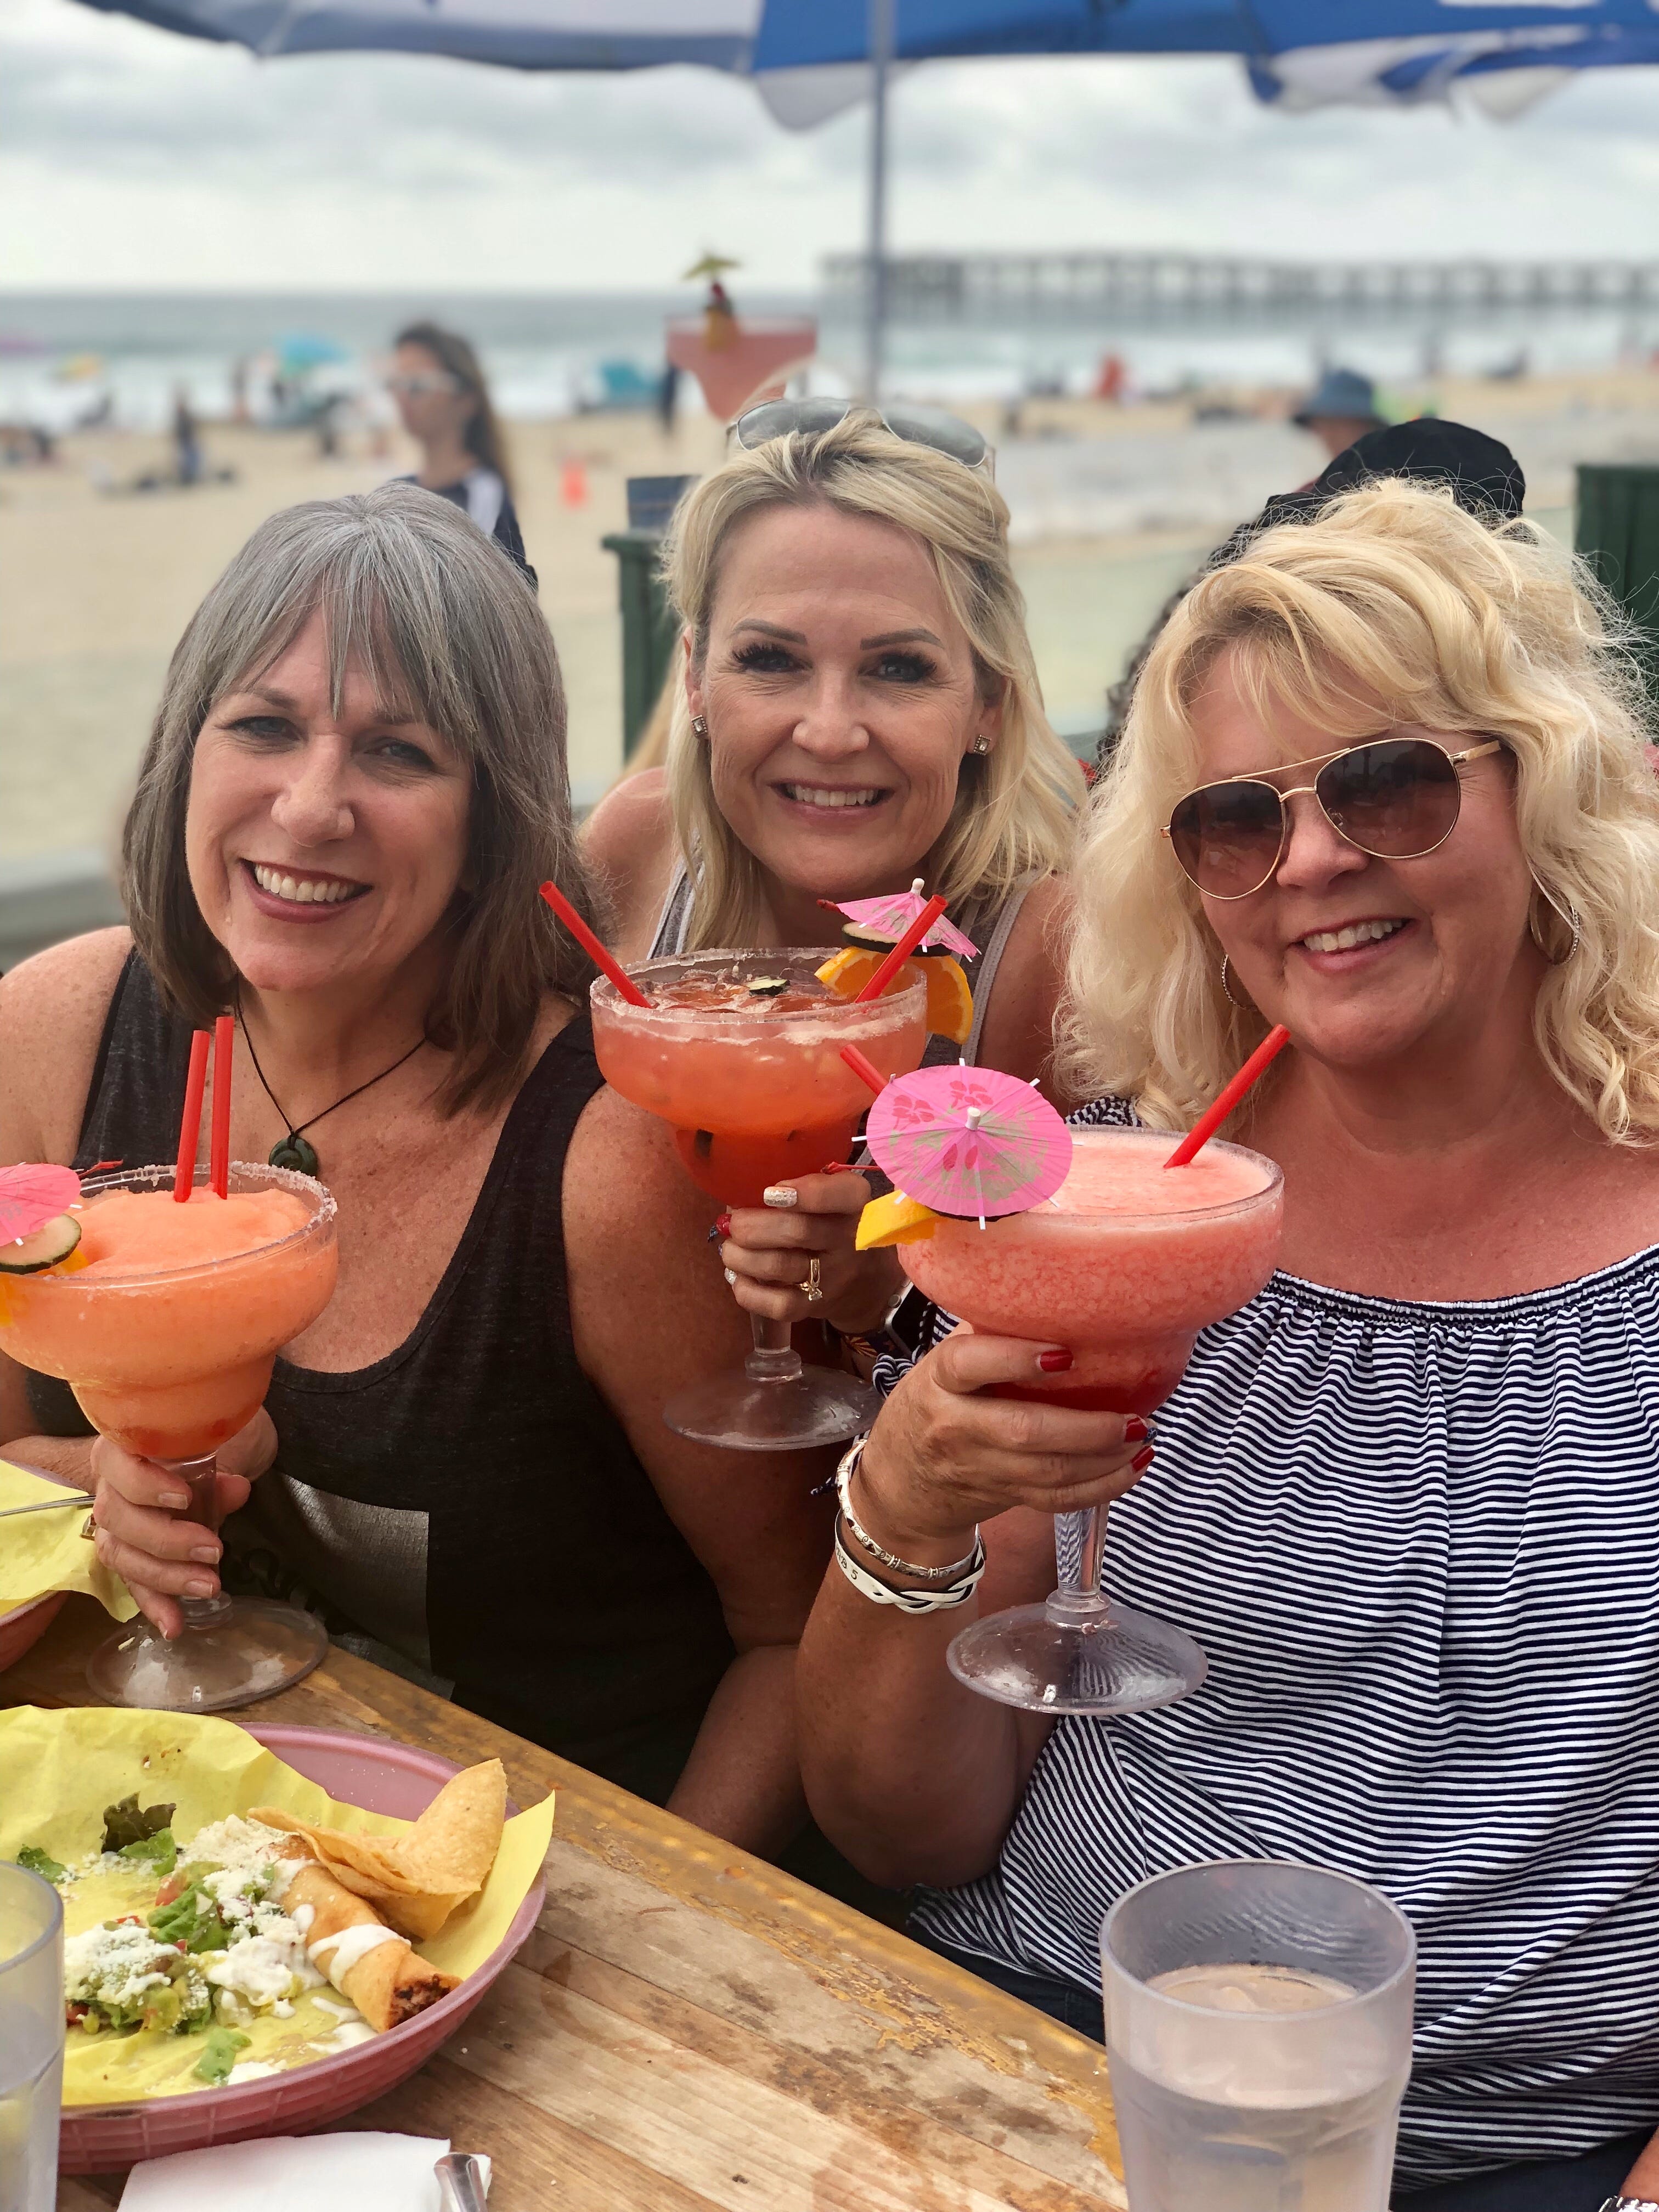 I drank huge margaritas at the Baja Beach Cafe on Mission Beach with Rhonda Rhiner and Carrie Collins. They were amazing.